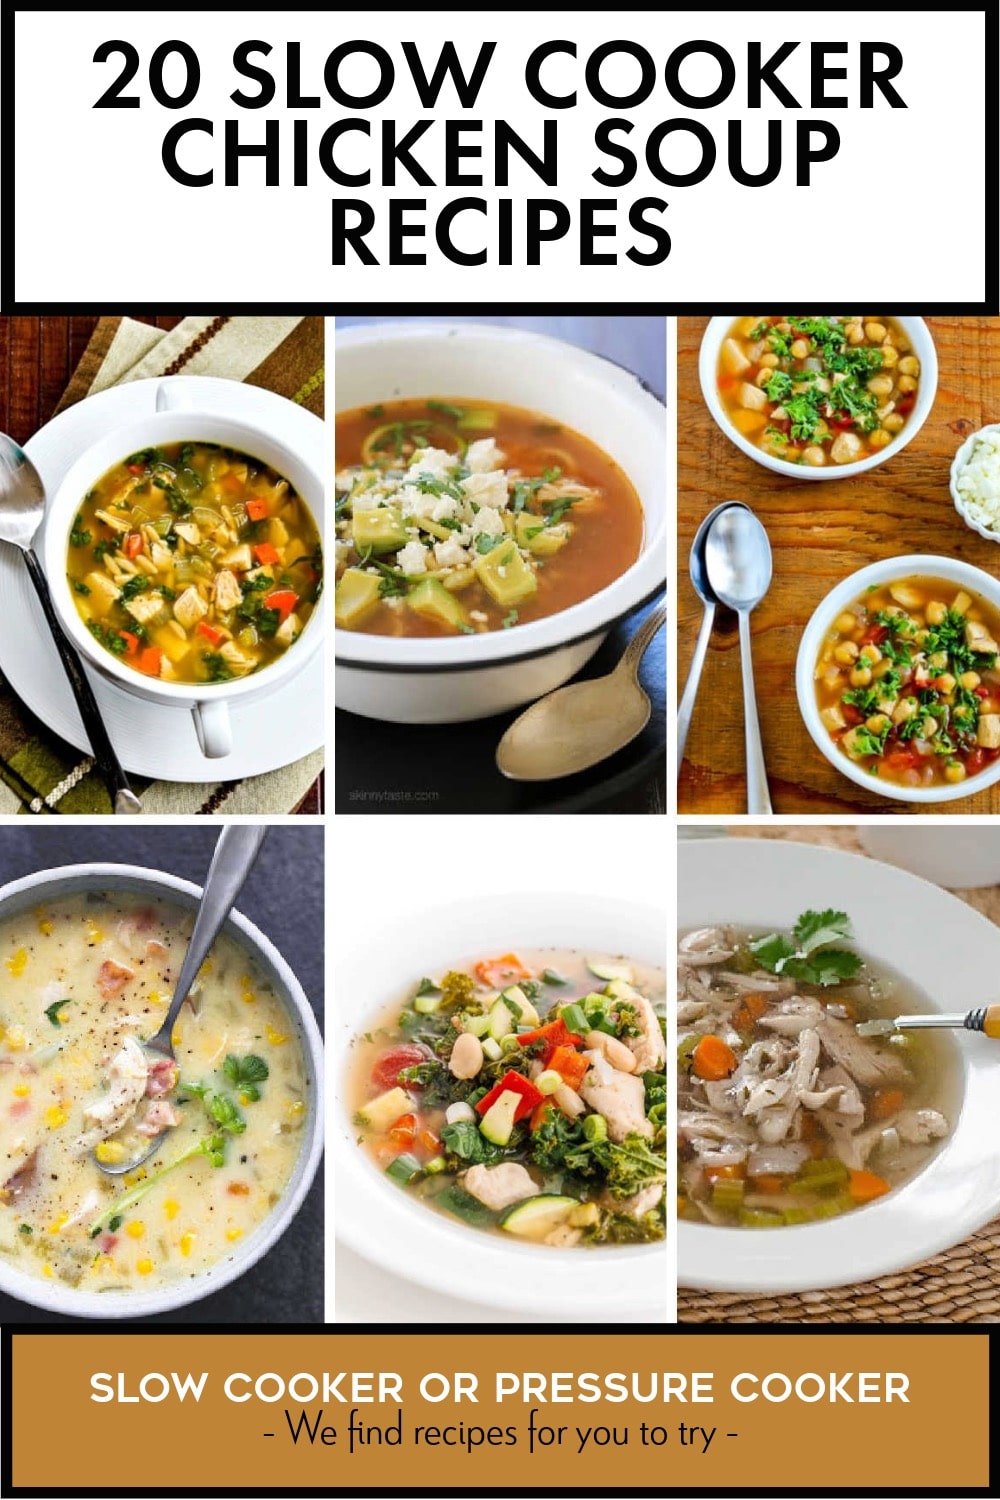 Pinterest image of 20 Slow Cooker Chicken Soup Recipes